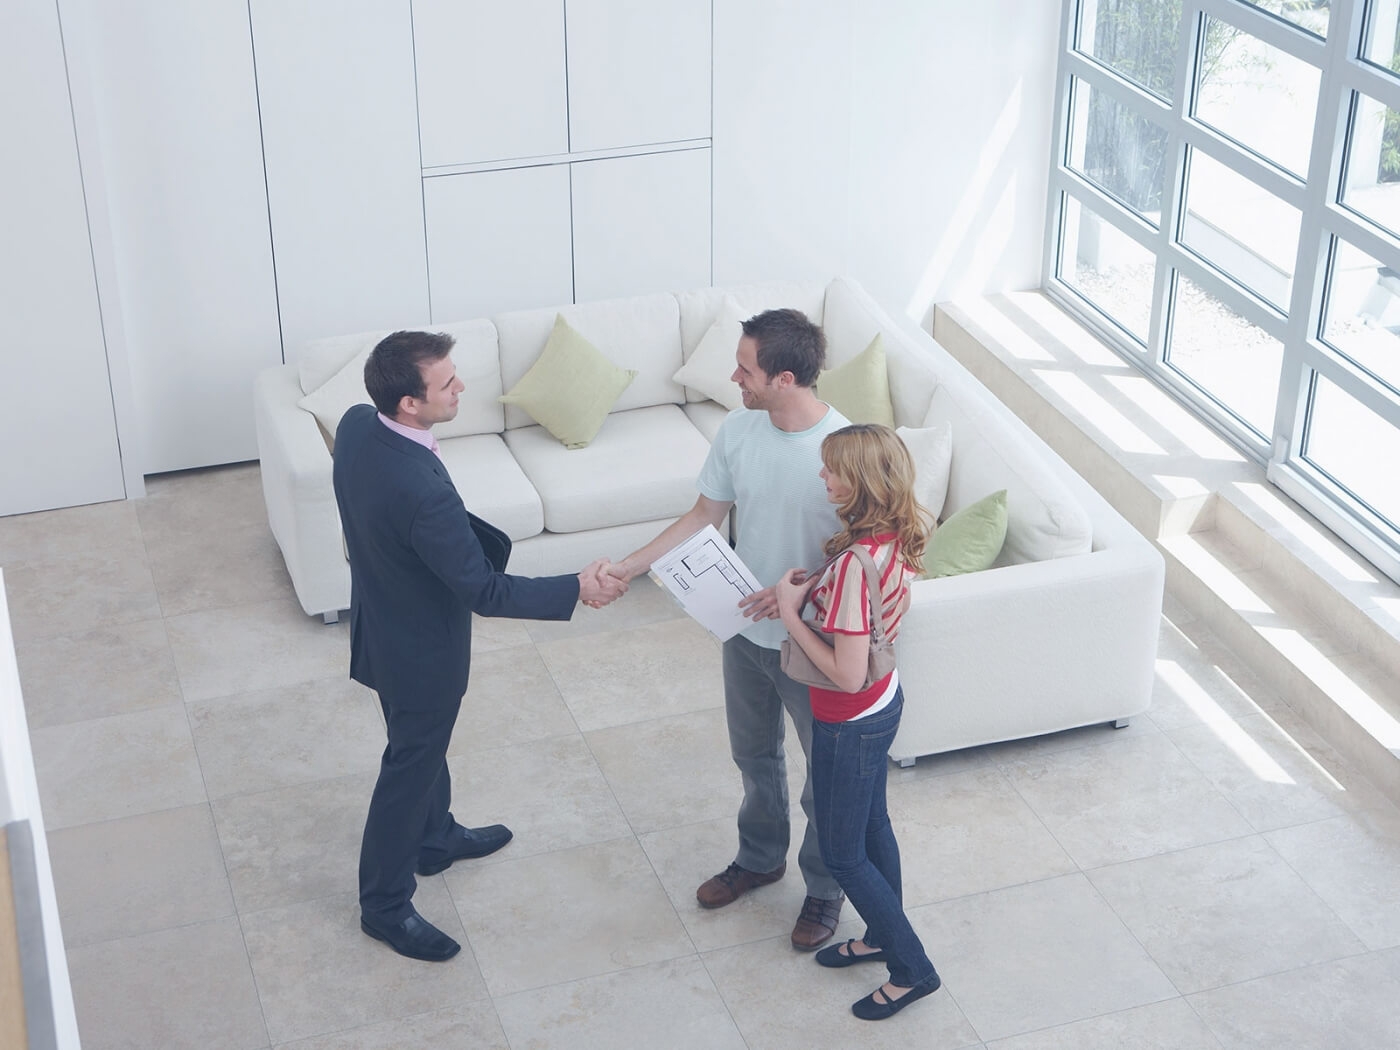 5 sure-fire ways to improve tenant relations